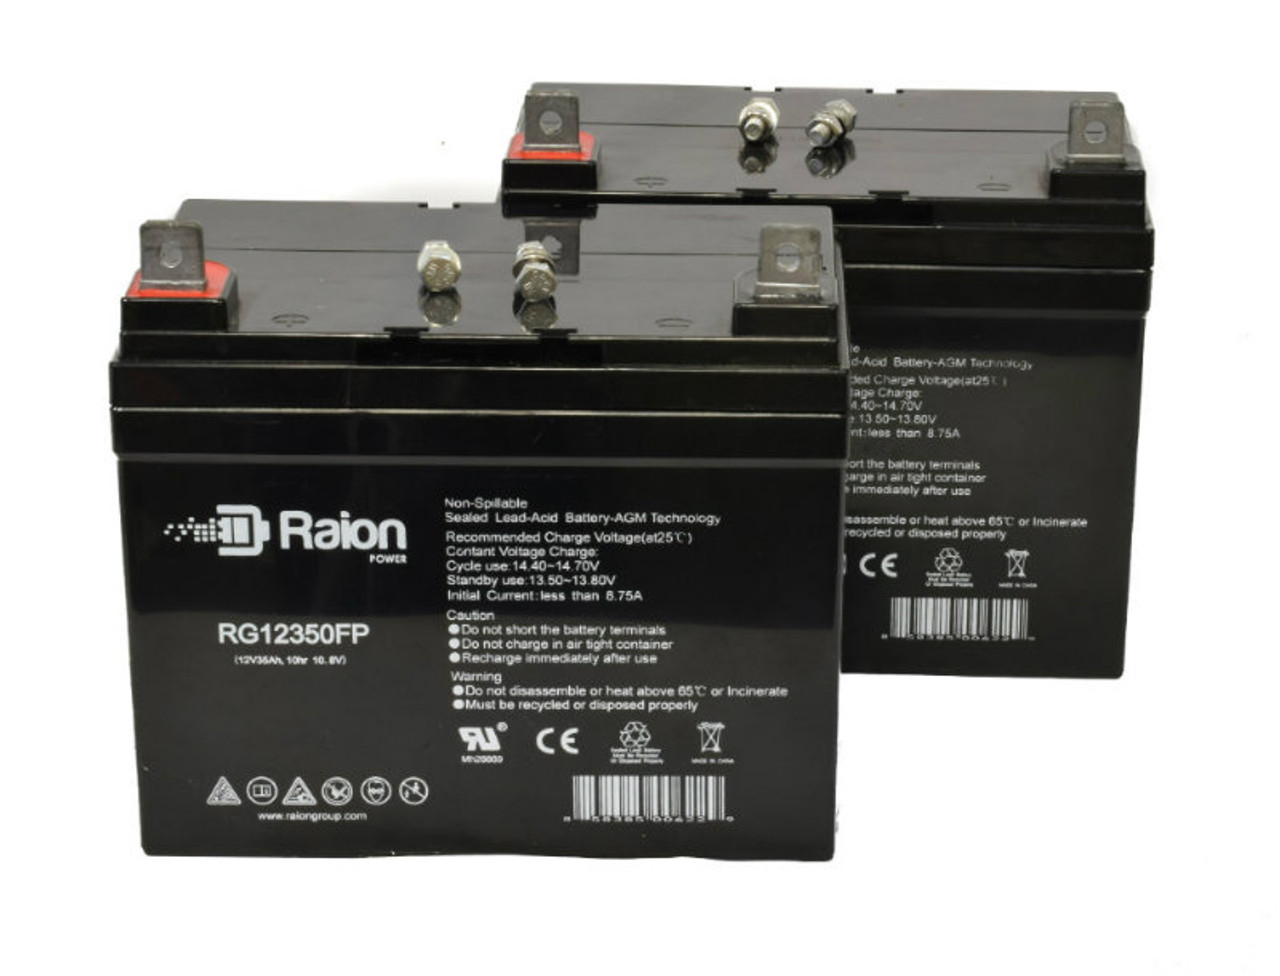 Raion Power Replacement 12V 35Ah Lawn Mower Battery for John Deere TY25221 - 2 Pack